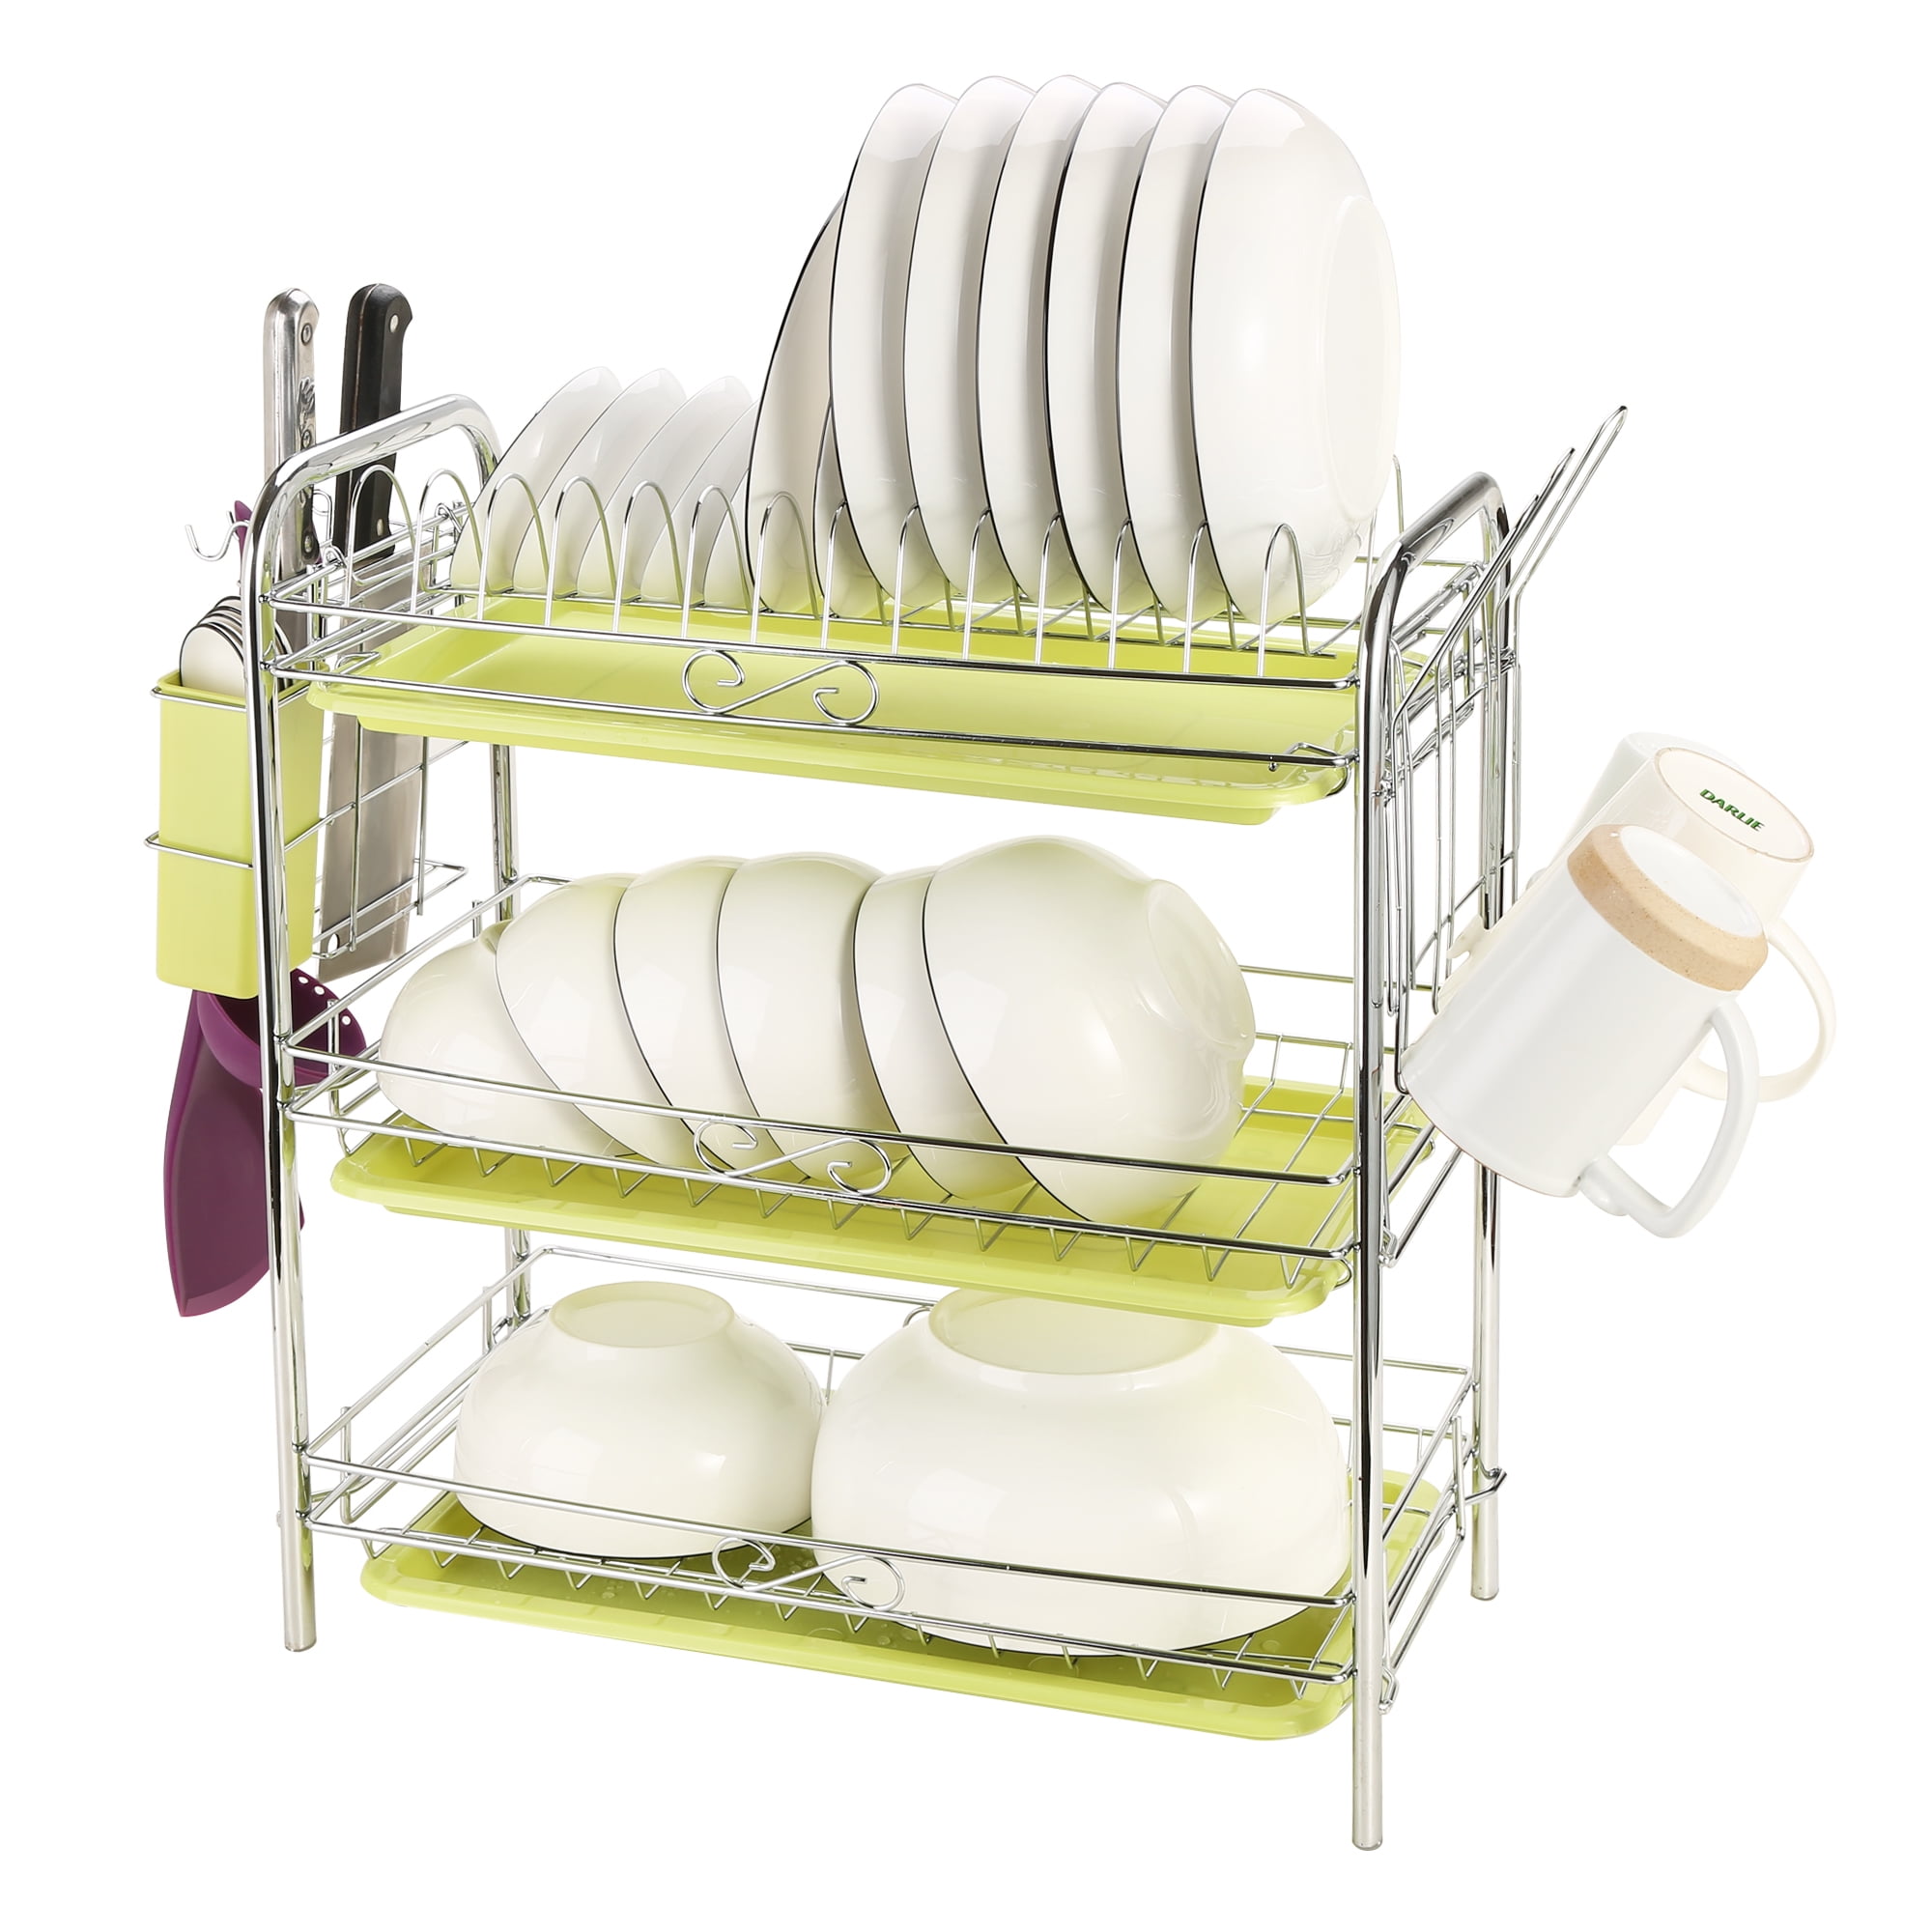 Odoland 2 Tiers Dish Drying Rack 2 Tier Chrome Dish Drainer Rack Kitchen Storage with Draining Board and Cutlery Cup 16.53 x 9.0